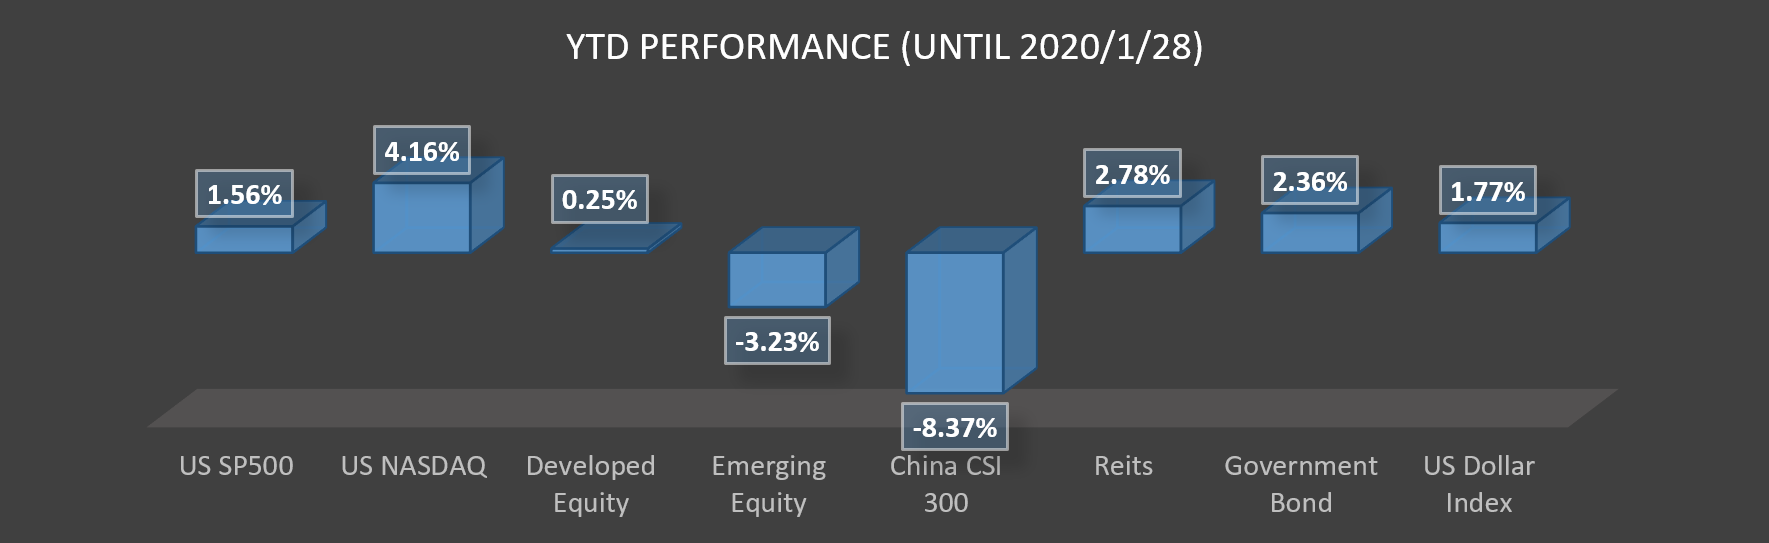 Performance as of 28 Jan 2020